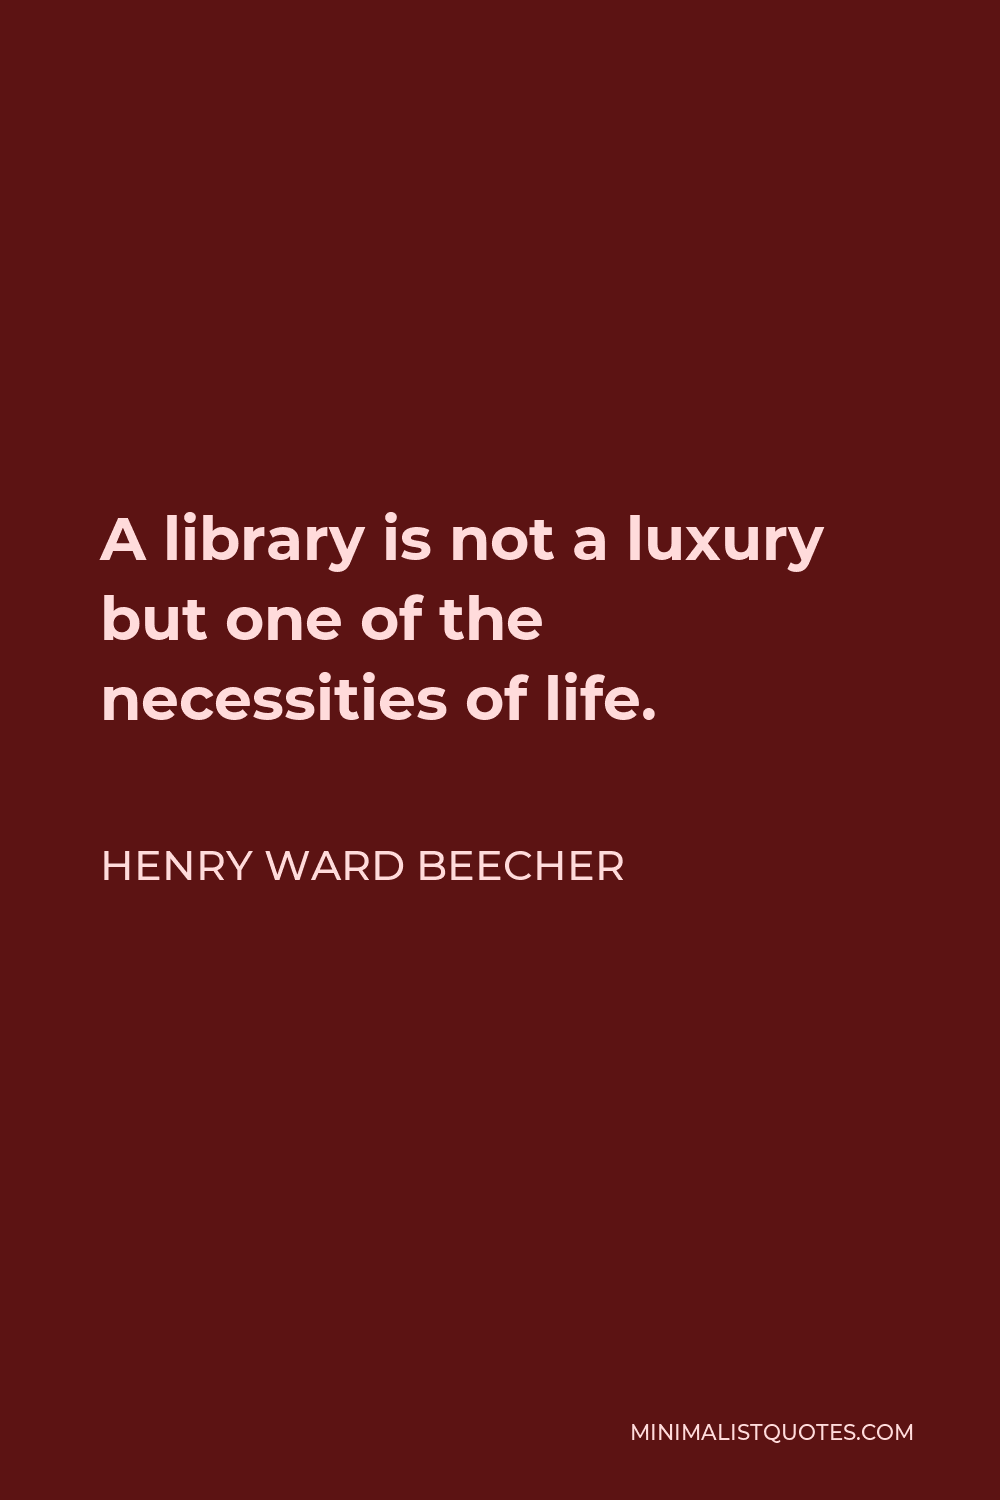 Henry Ward Beecher Quote - A library is not a luxury but one of the necessities of life.